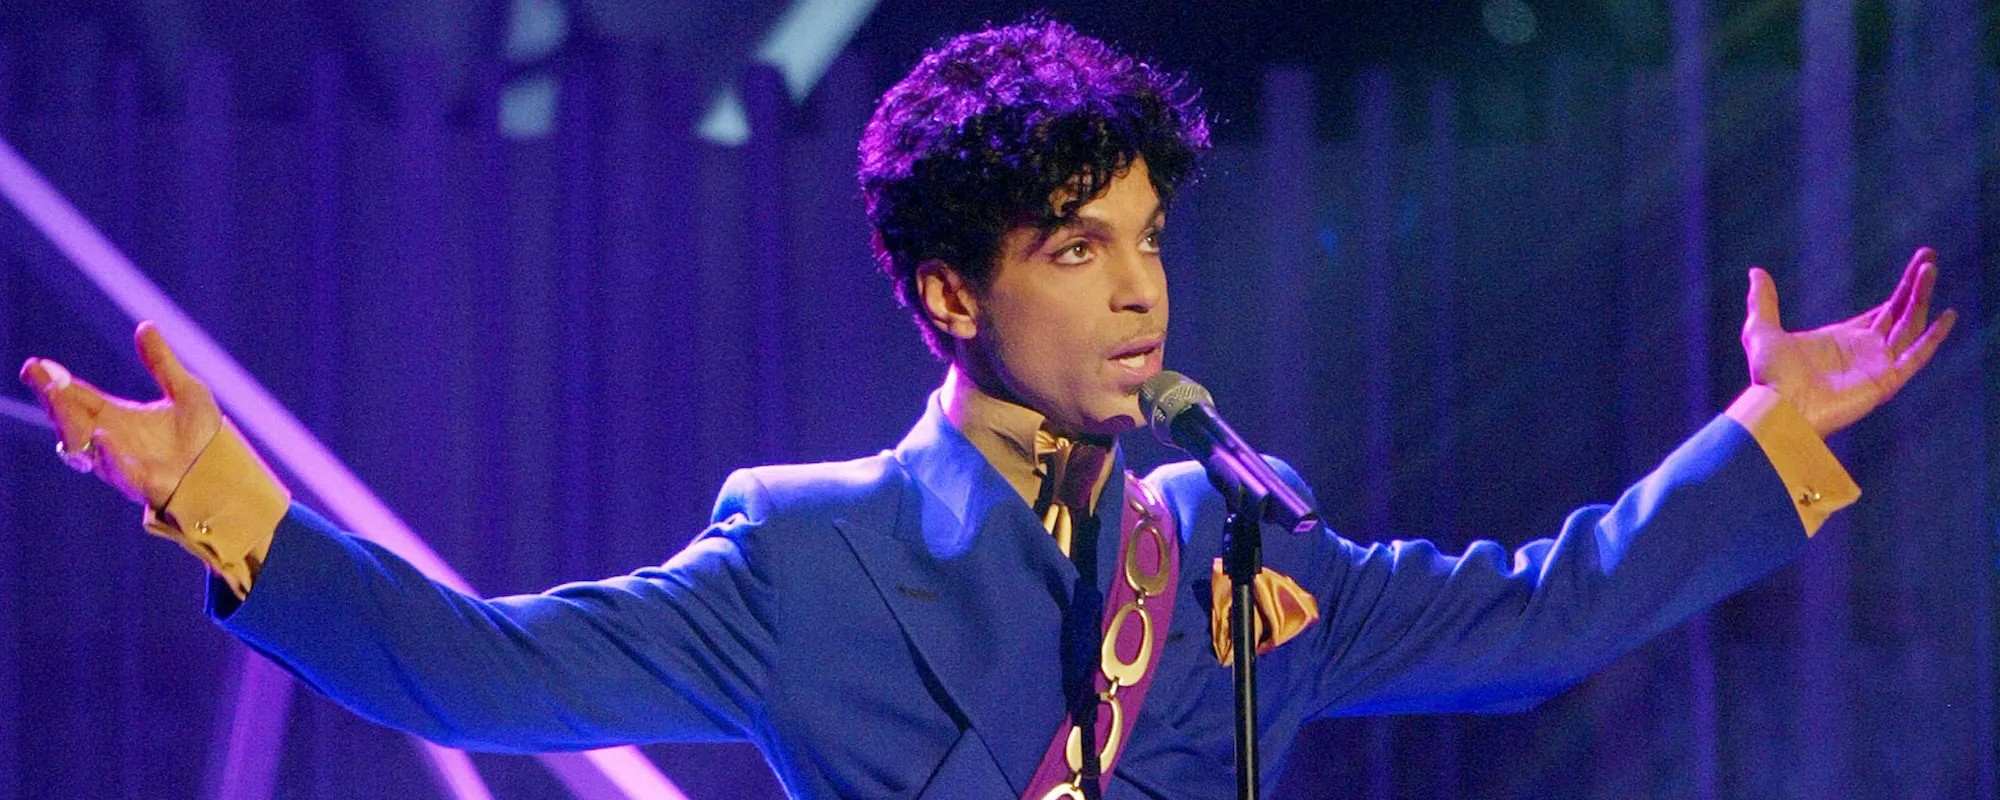 Unheard ‘Diamonds and Pearls’-Era Prince Live Show Available Now on High-Res Formats